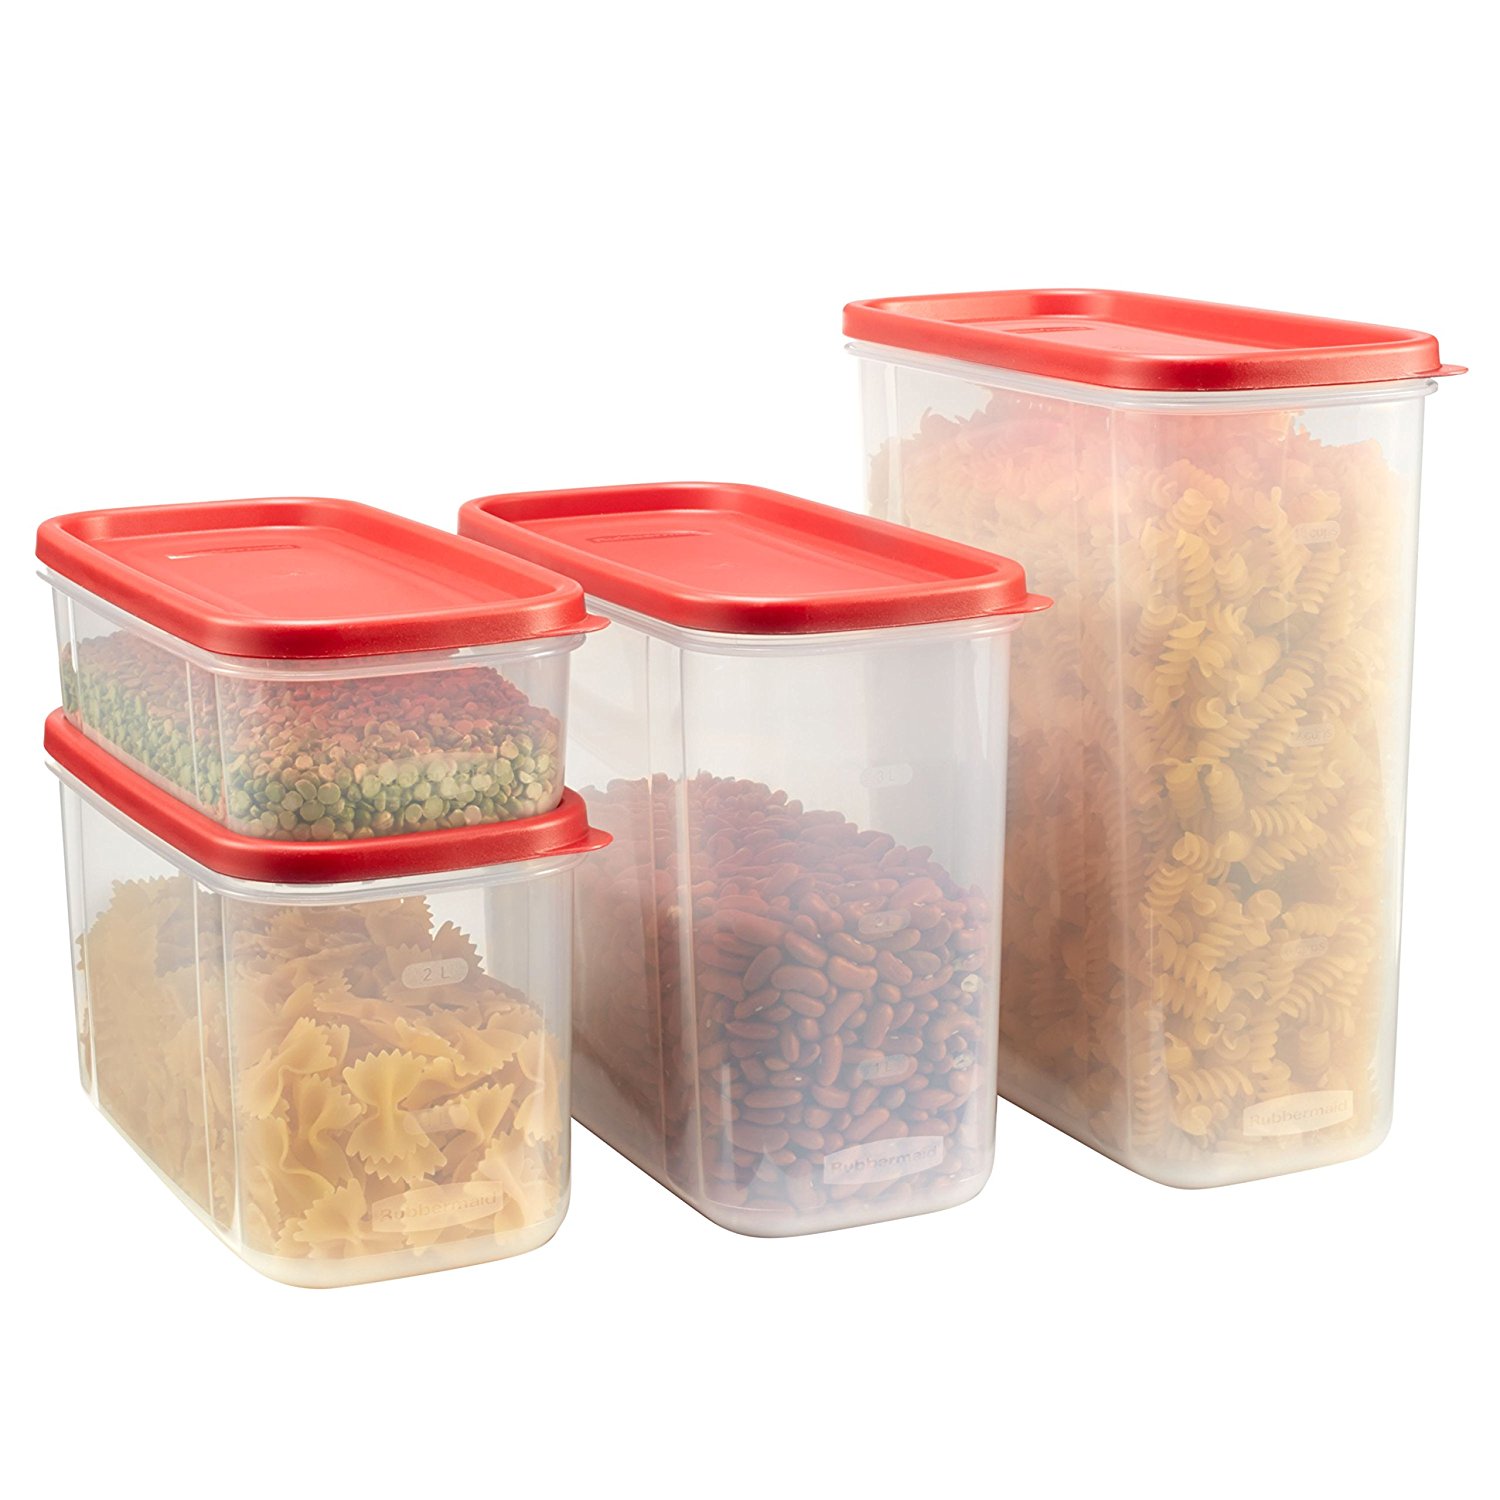 Rubbermaid Modular Food Storage Canisters (8 Piece Set) Only $12.62!